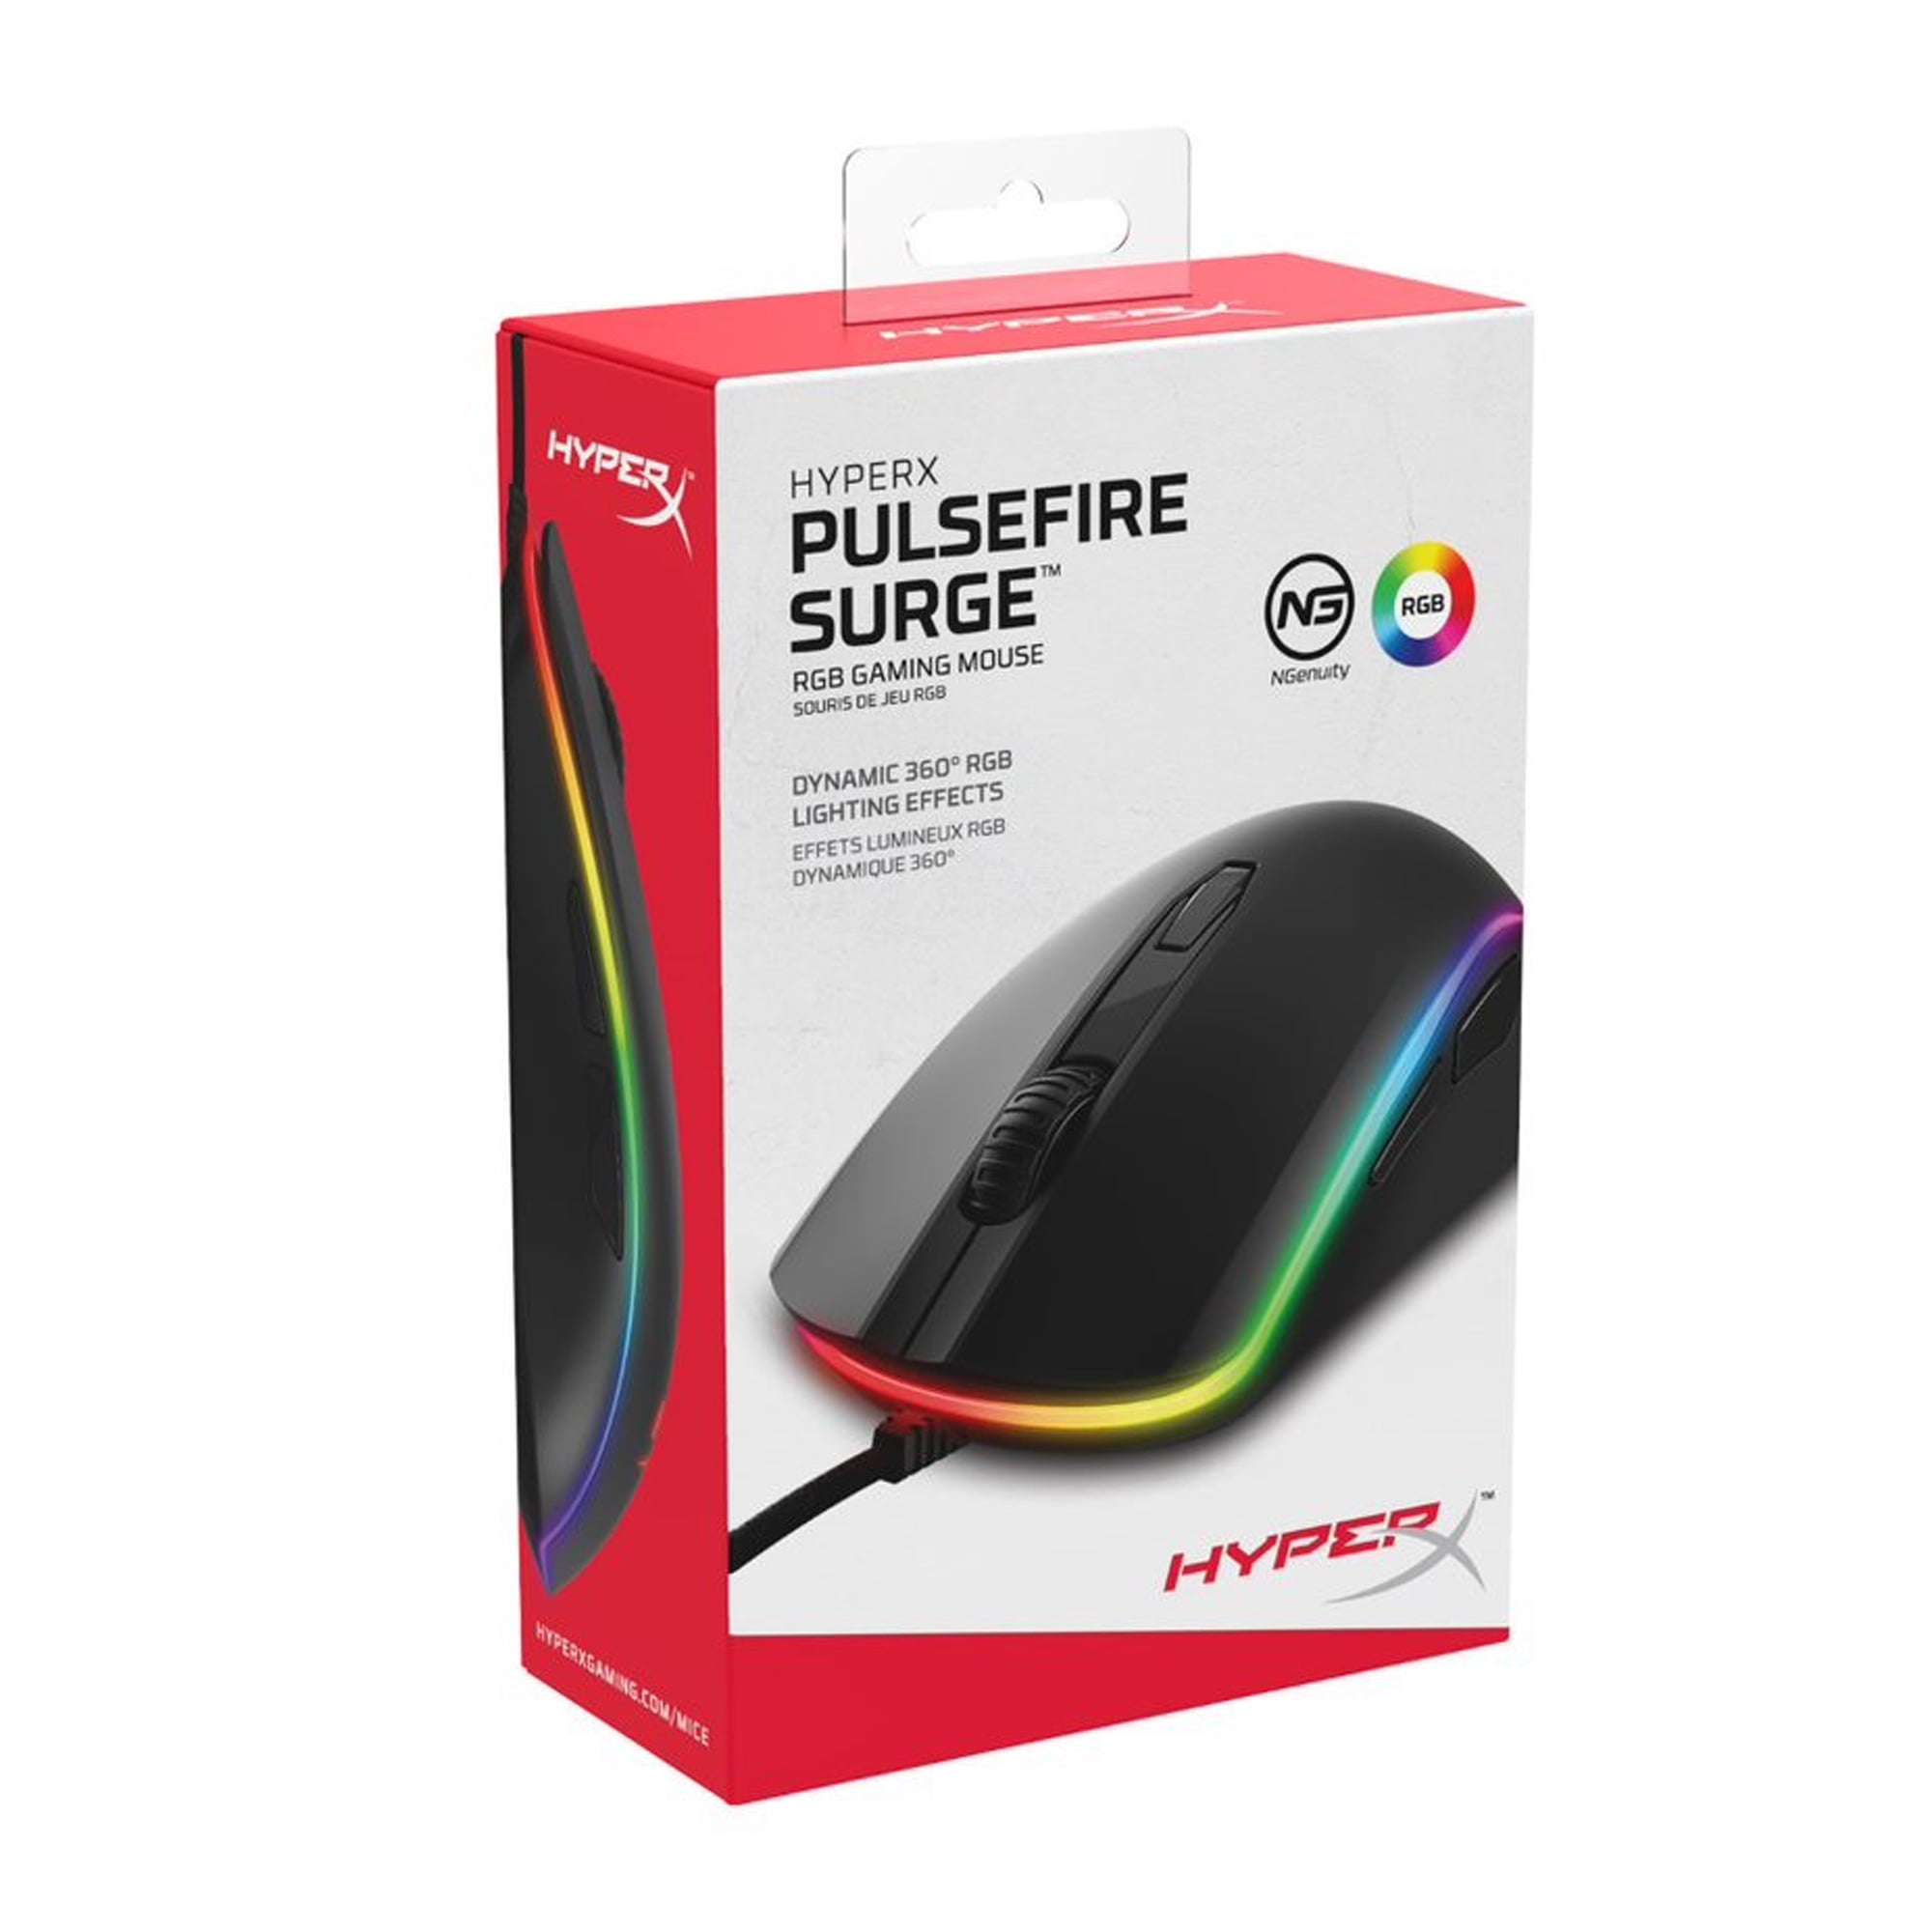 HyperX Pulsefire Surge Wired Optical Gaming Mouse with RGB Lighting - Black